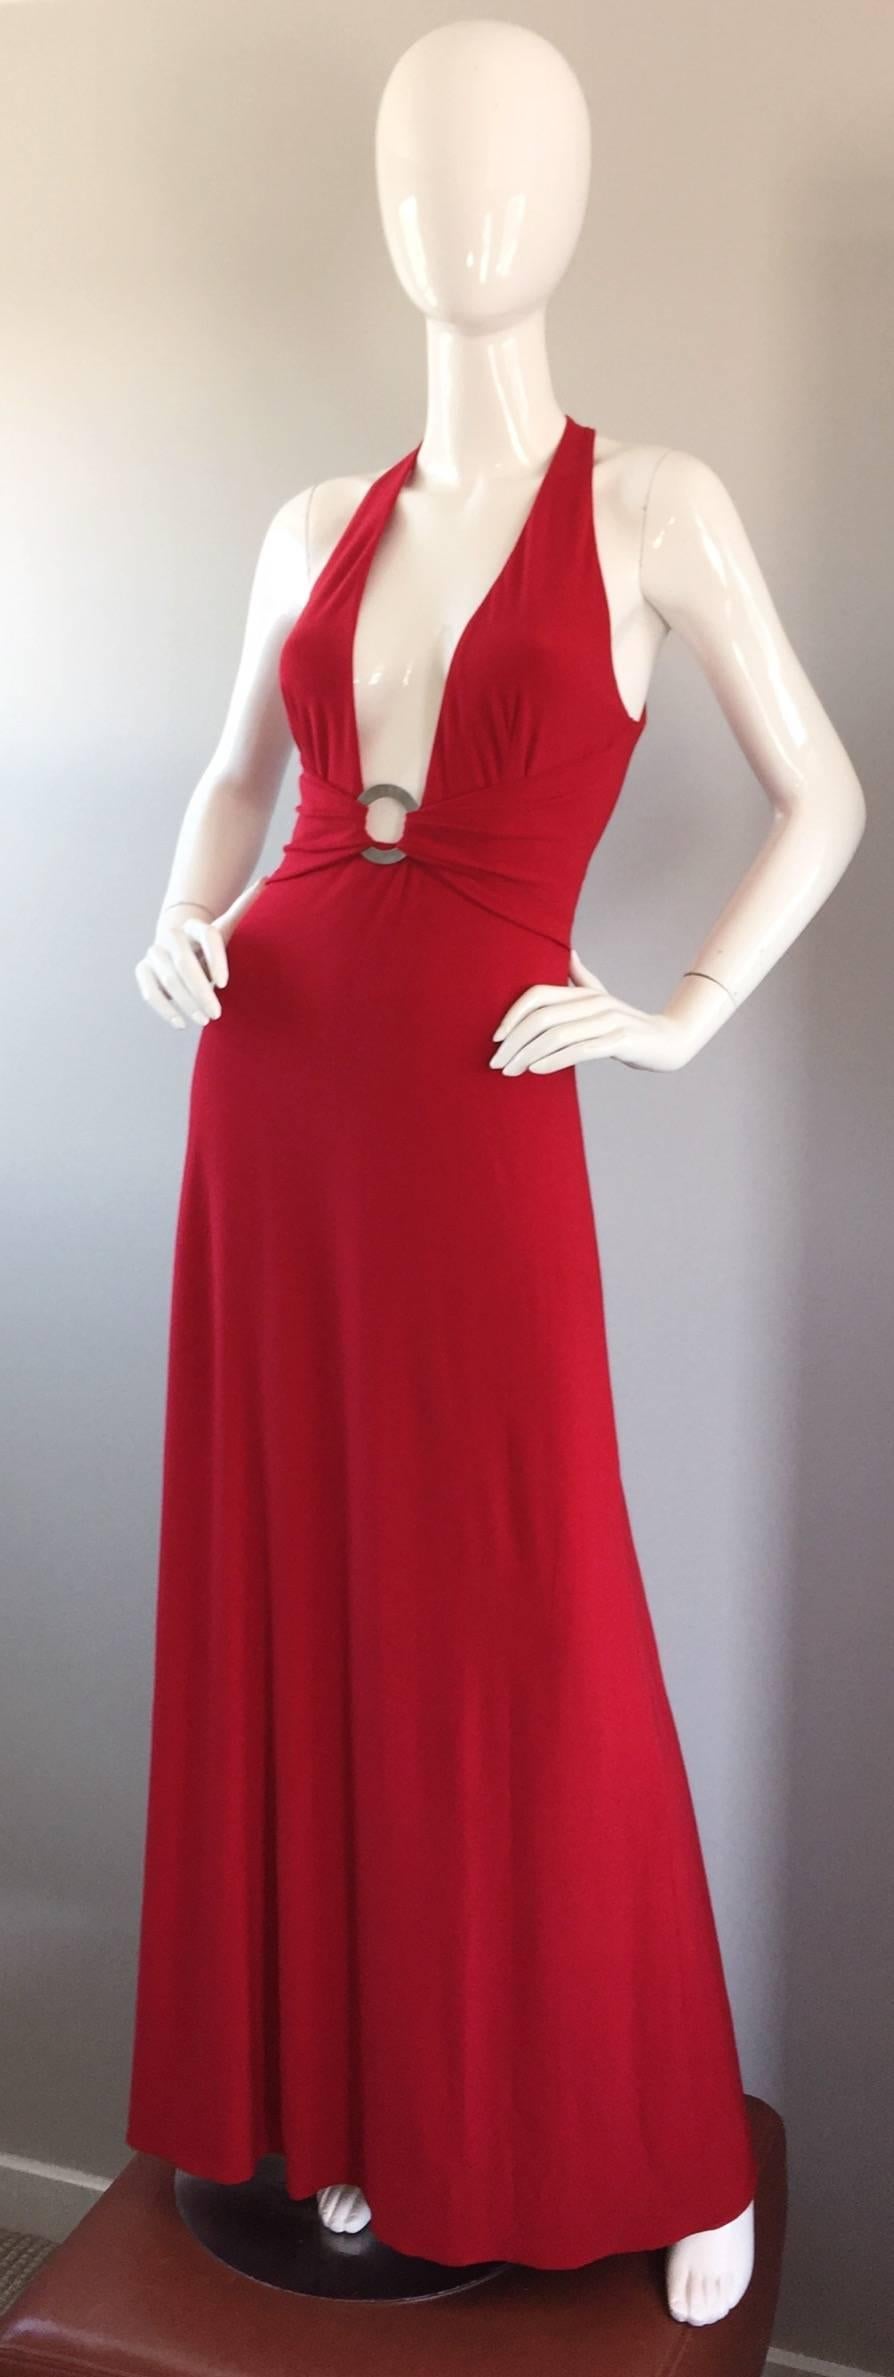 Women's Amazing Vintage Lillie Rubin Lipstick Red Sexy ' Plunging ' Jersey Gown / Dress